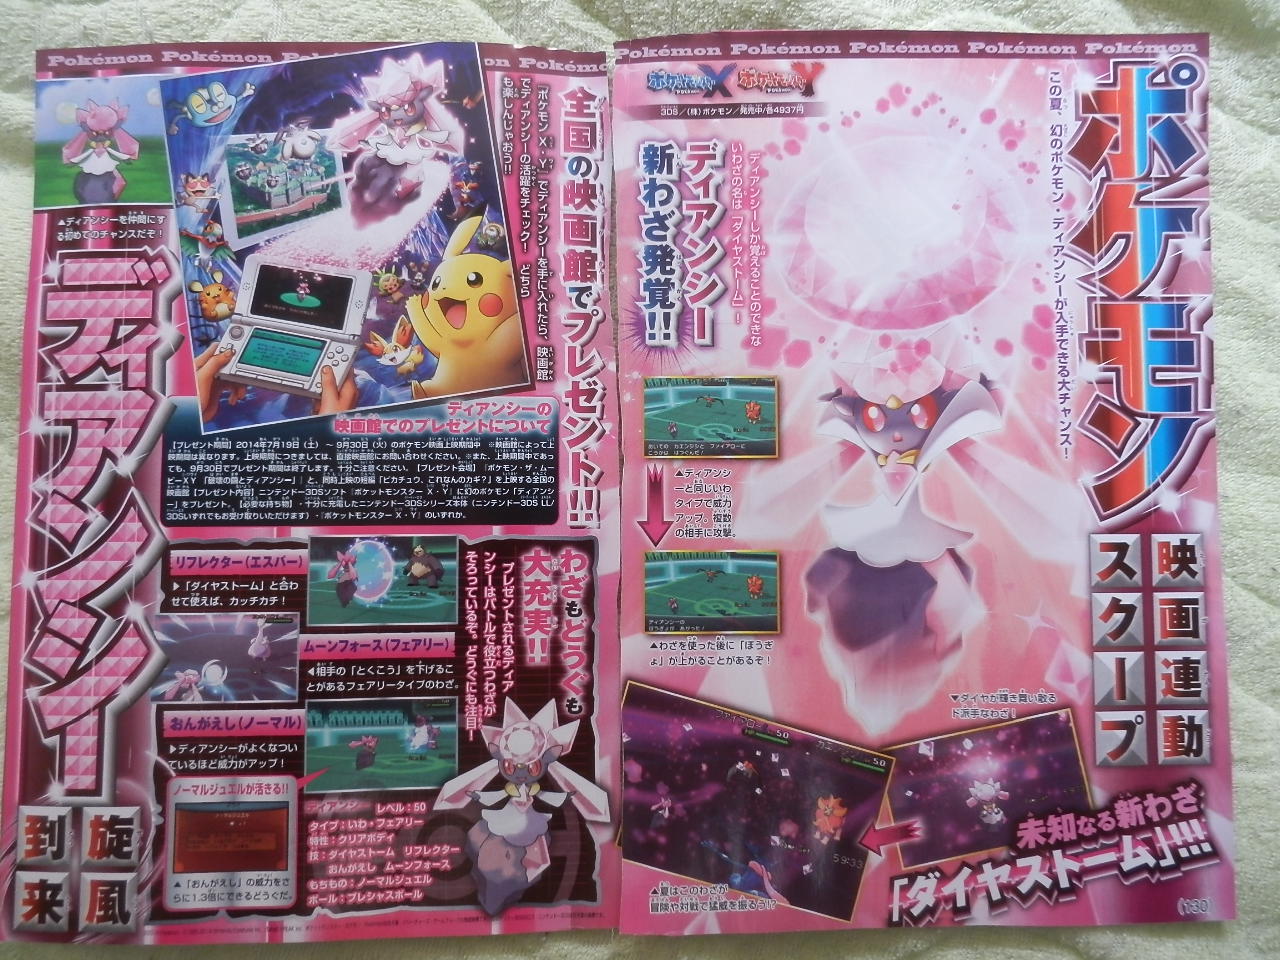 Corocoro Comic Leaks Reveal New Info On The Movie And Its Theater Event Pocketmonsters Net